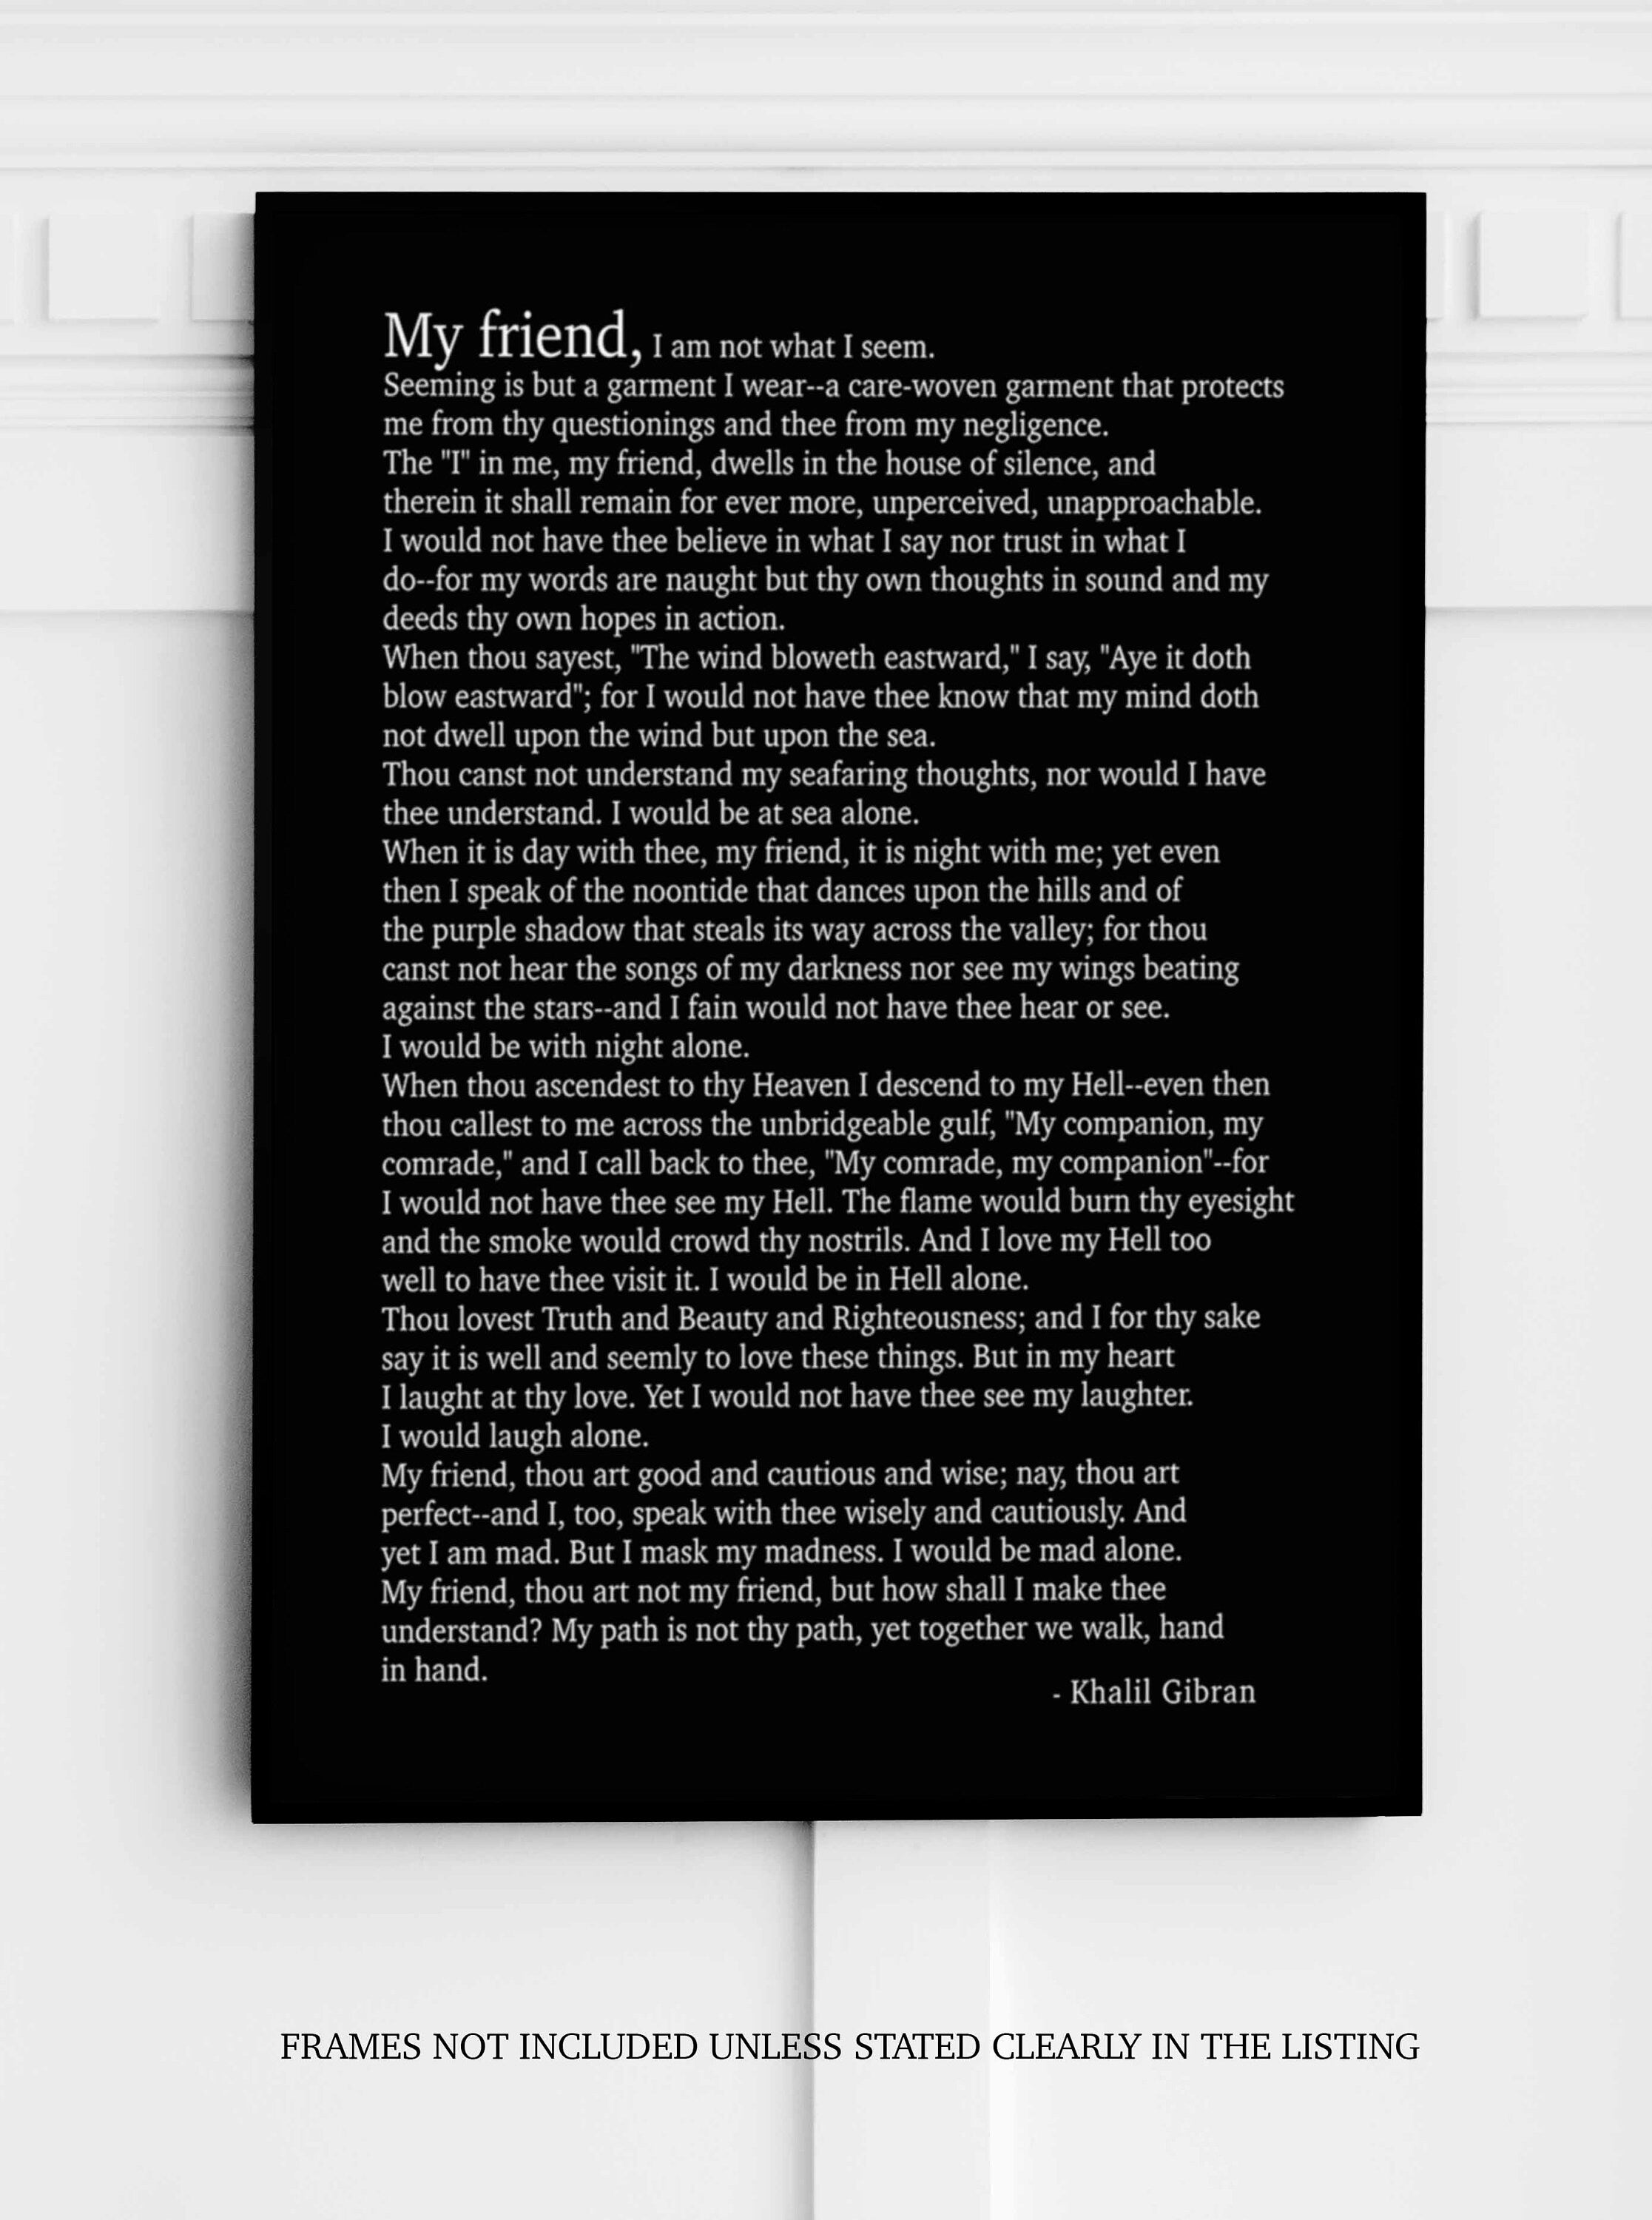 Kahlil Gibran Poem My Friend - Poetry Decor Wall Art Prints, Literary Decor Gifts